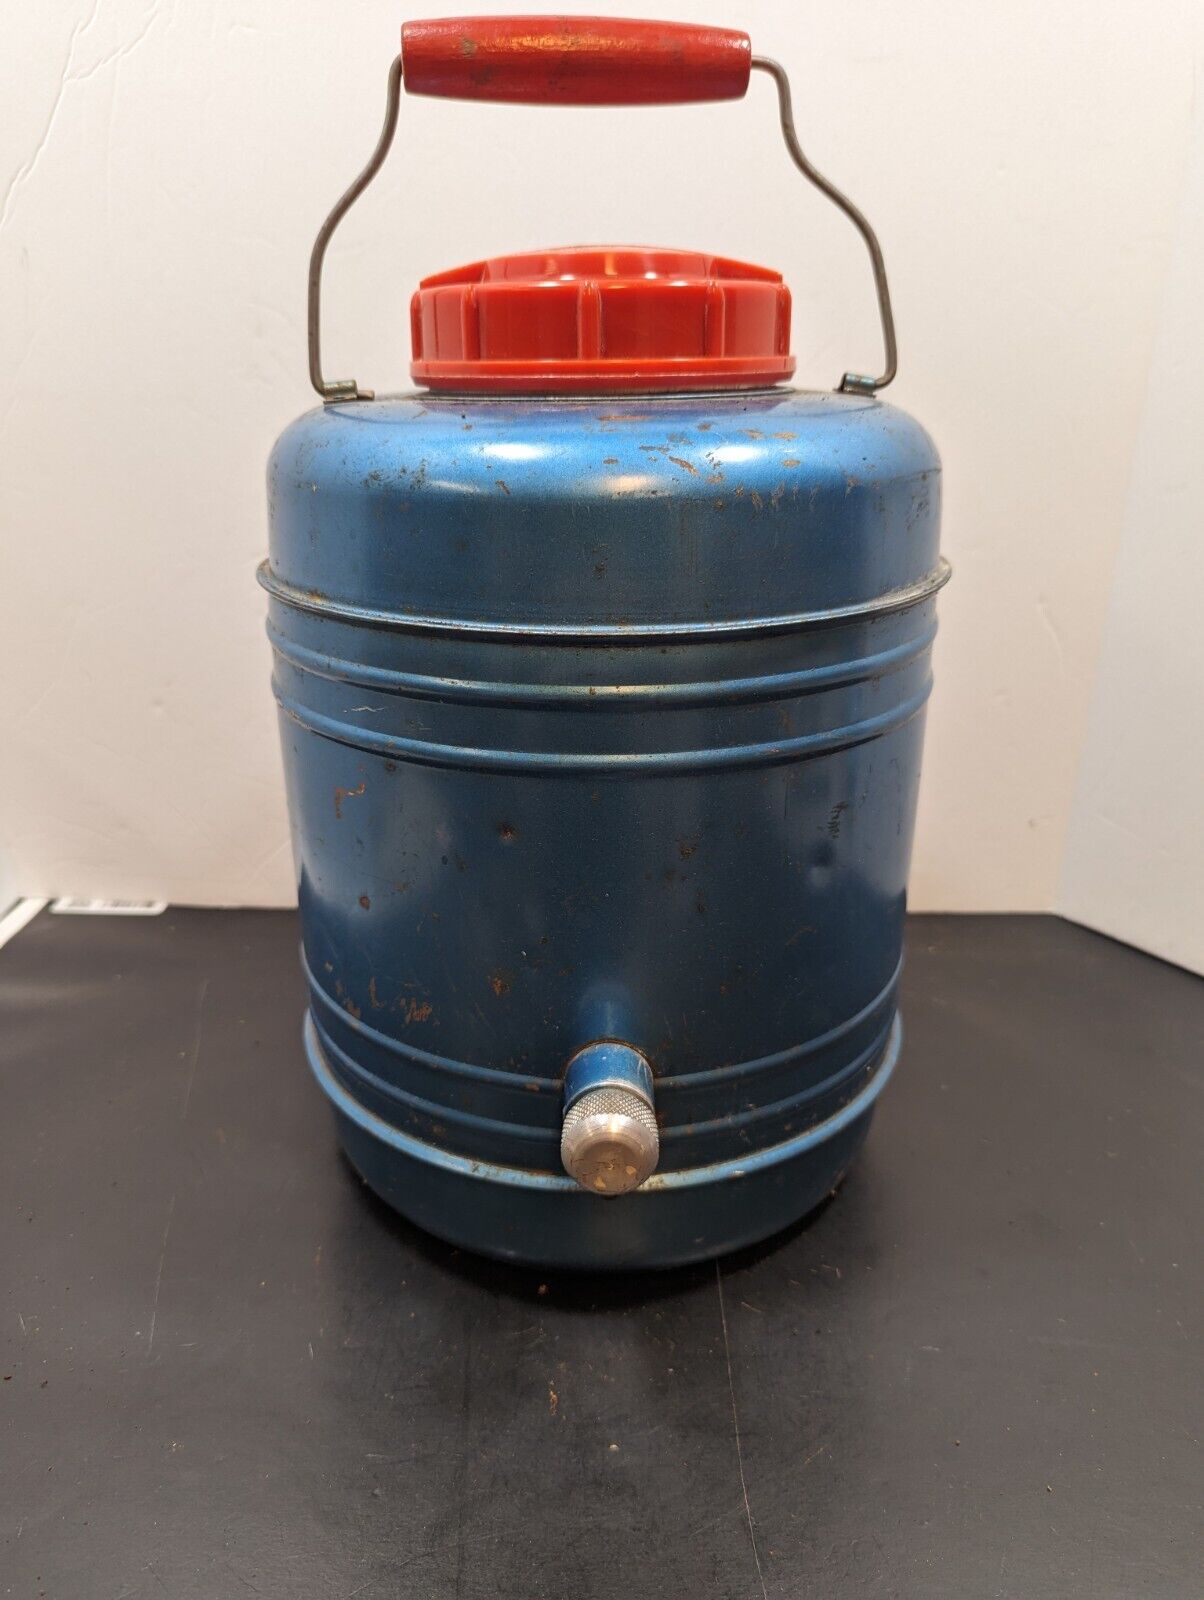 Vintage 1950s All American Cooler Thermos Jug Picnic Blue Metal With Wood Handle